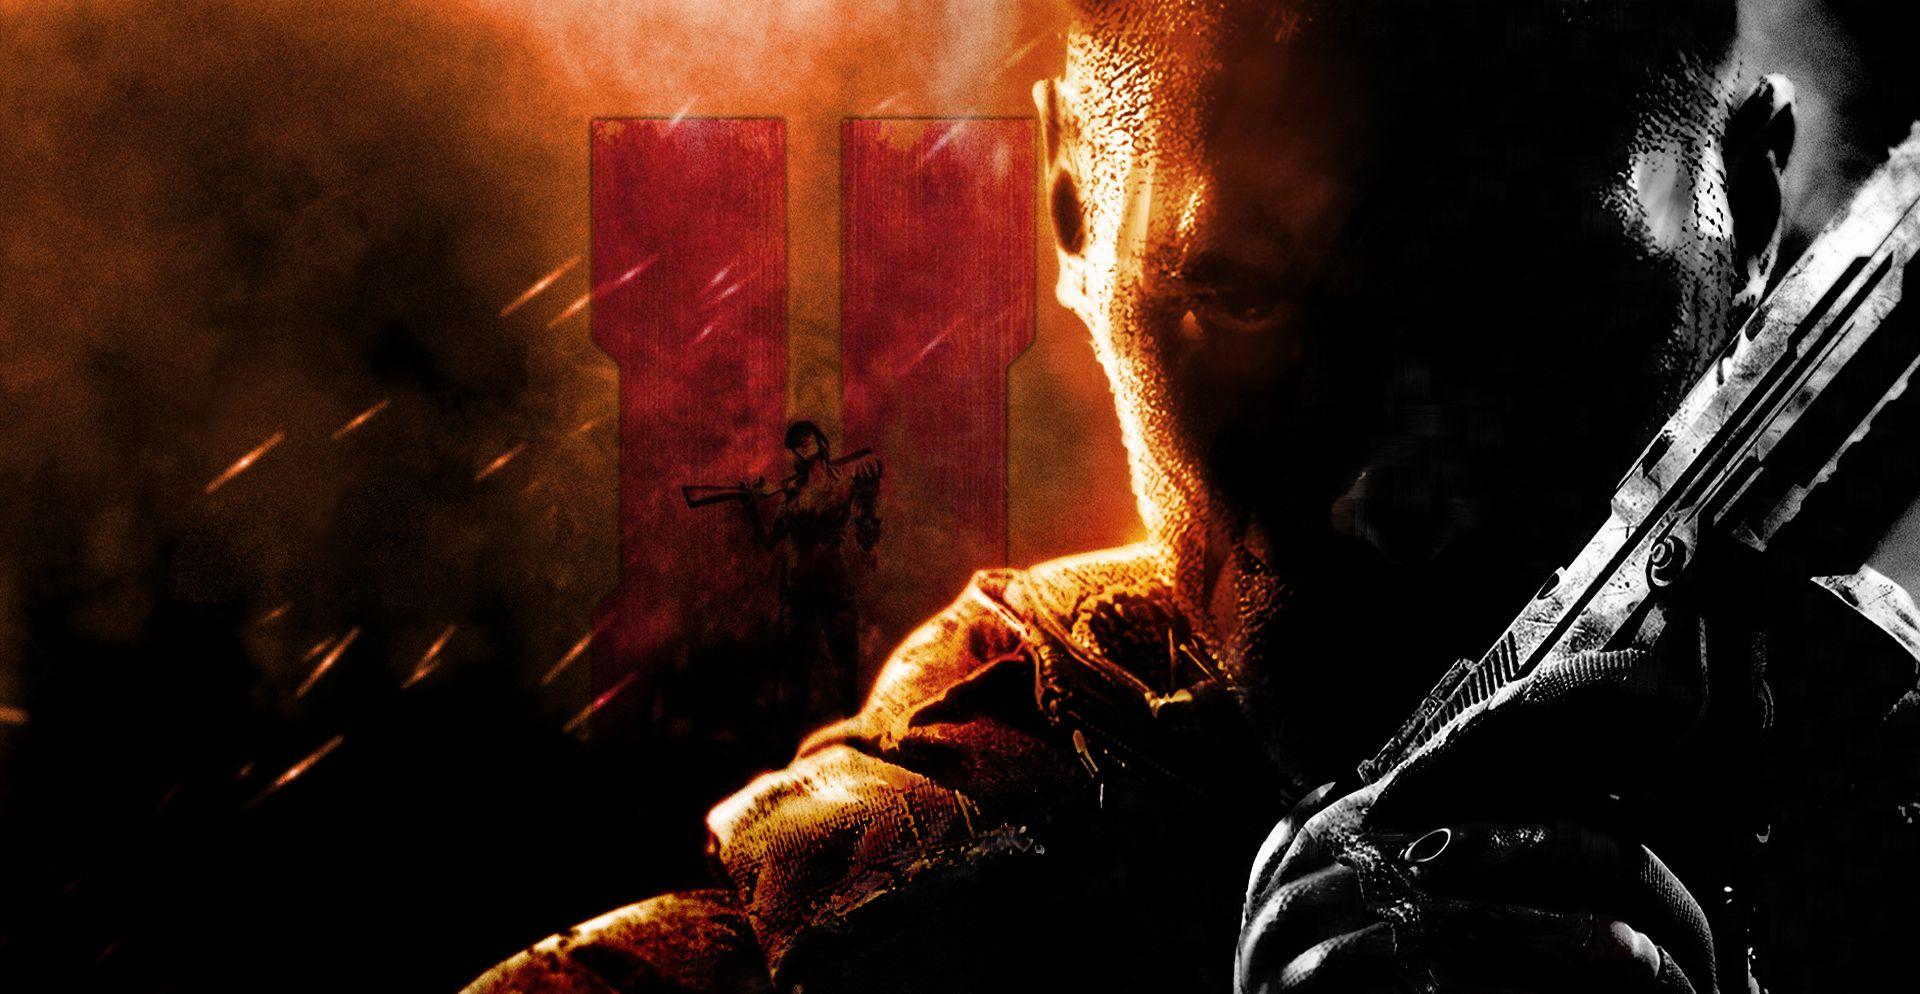 Call Of Duty: Black Ops II Wallpaper and Background Imagex994